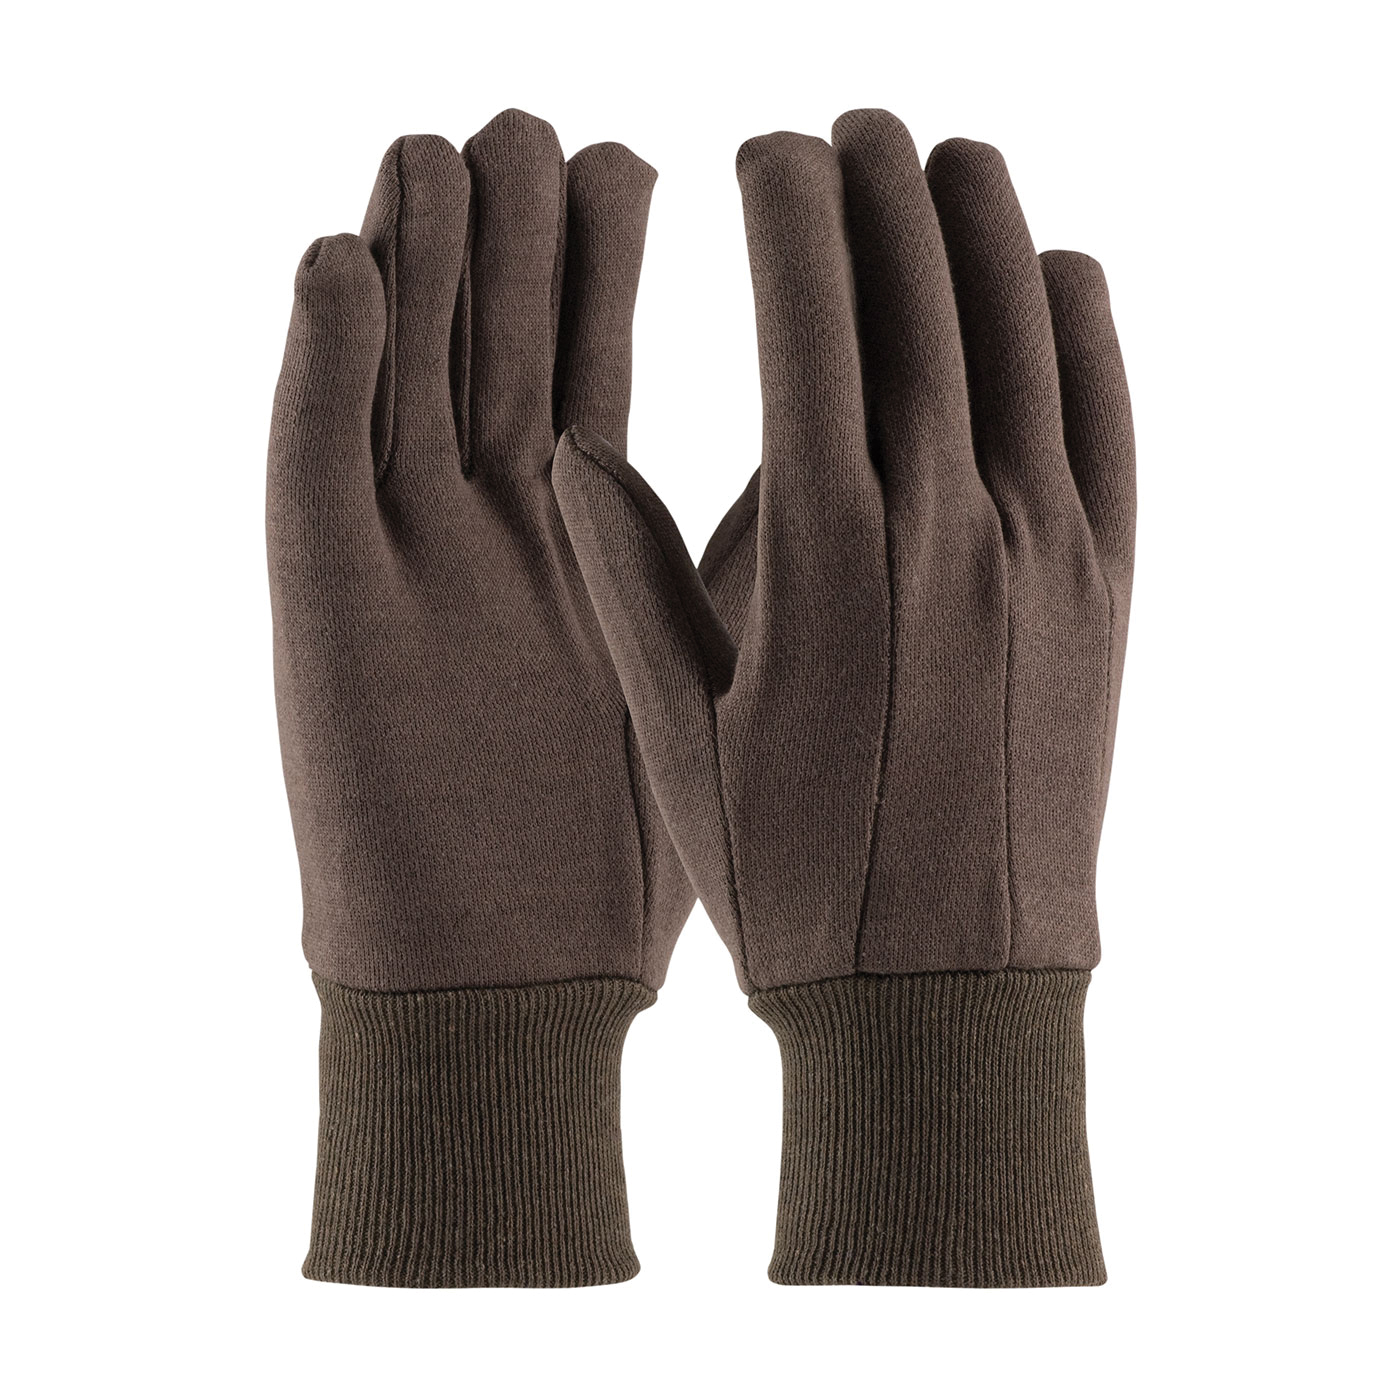 PIP® 750C General Purpose Gloves, Work, Clute Cut/Full Finger/Straight Thumb Style, L, Cotton/Jersey Palm, Cotton/Jersey, Brown, Knit Wrist Cuff, Uncoated Coating, Resists: Abrasion, Unlined Lining